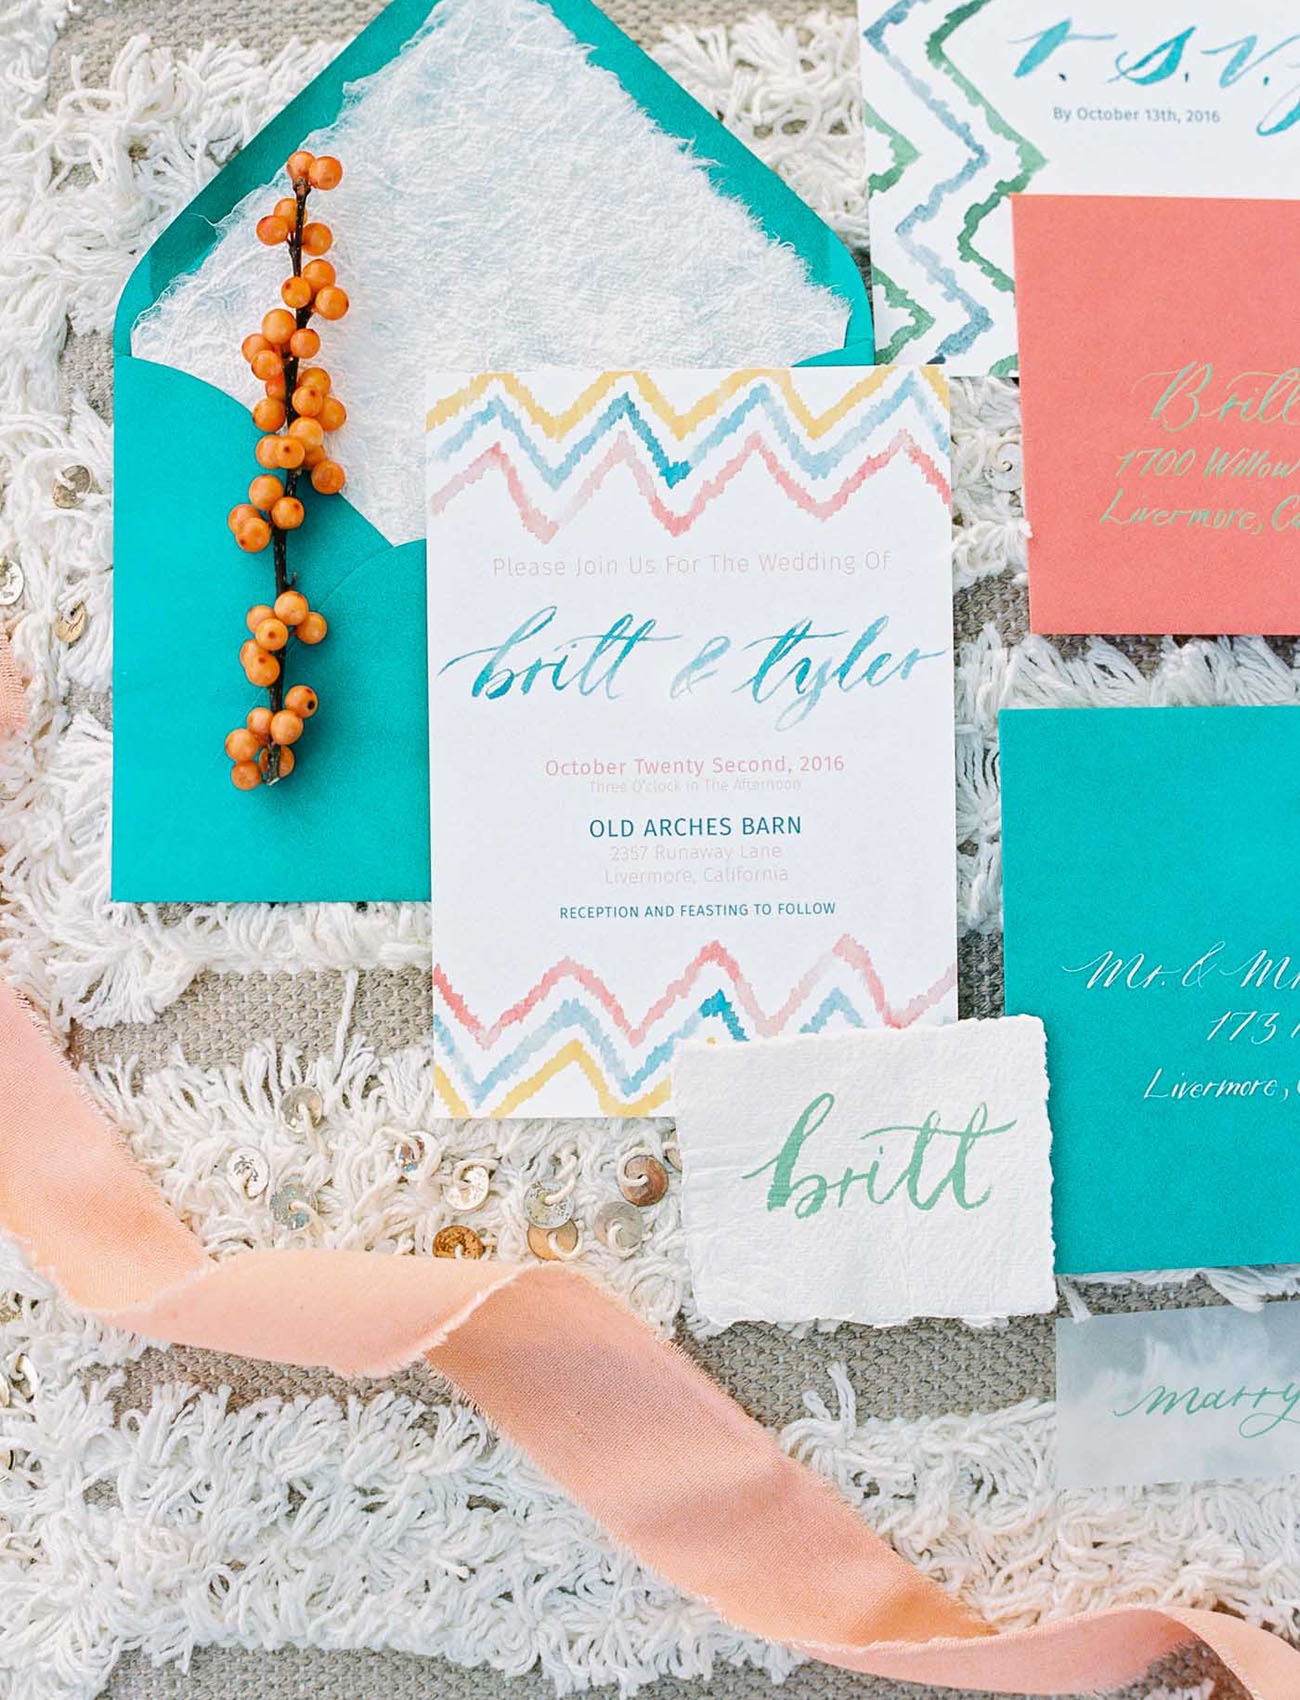 The adorable wedding stationary set was done in turquoise, orange and blue